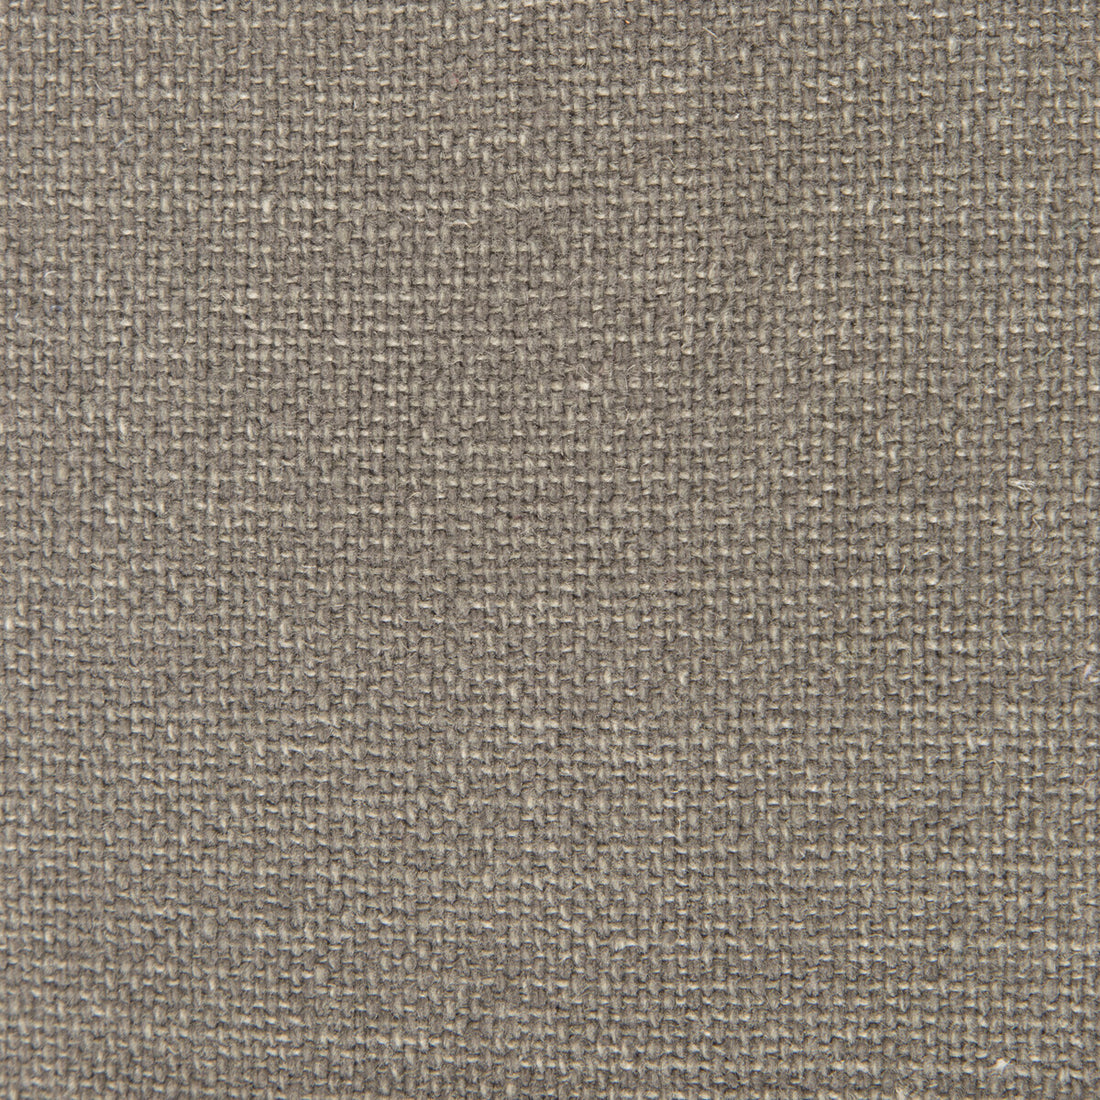 Nicaragua fabric in acero color - pattern GDT5239.027.0 - by Gaston y Daniela in the Basics collection